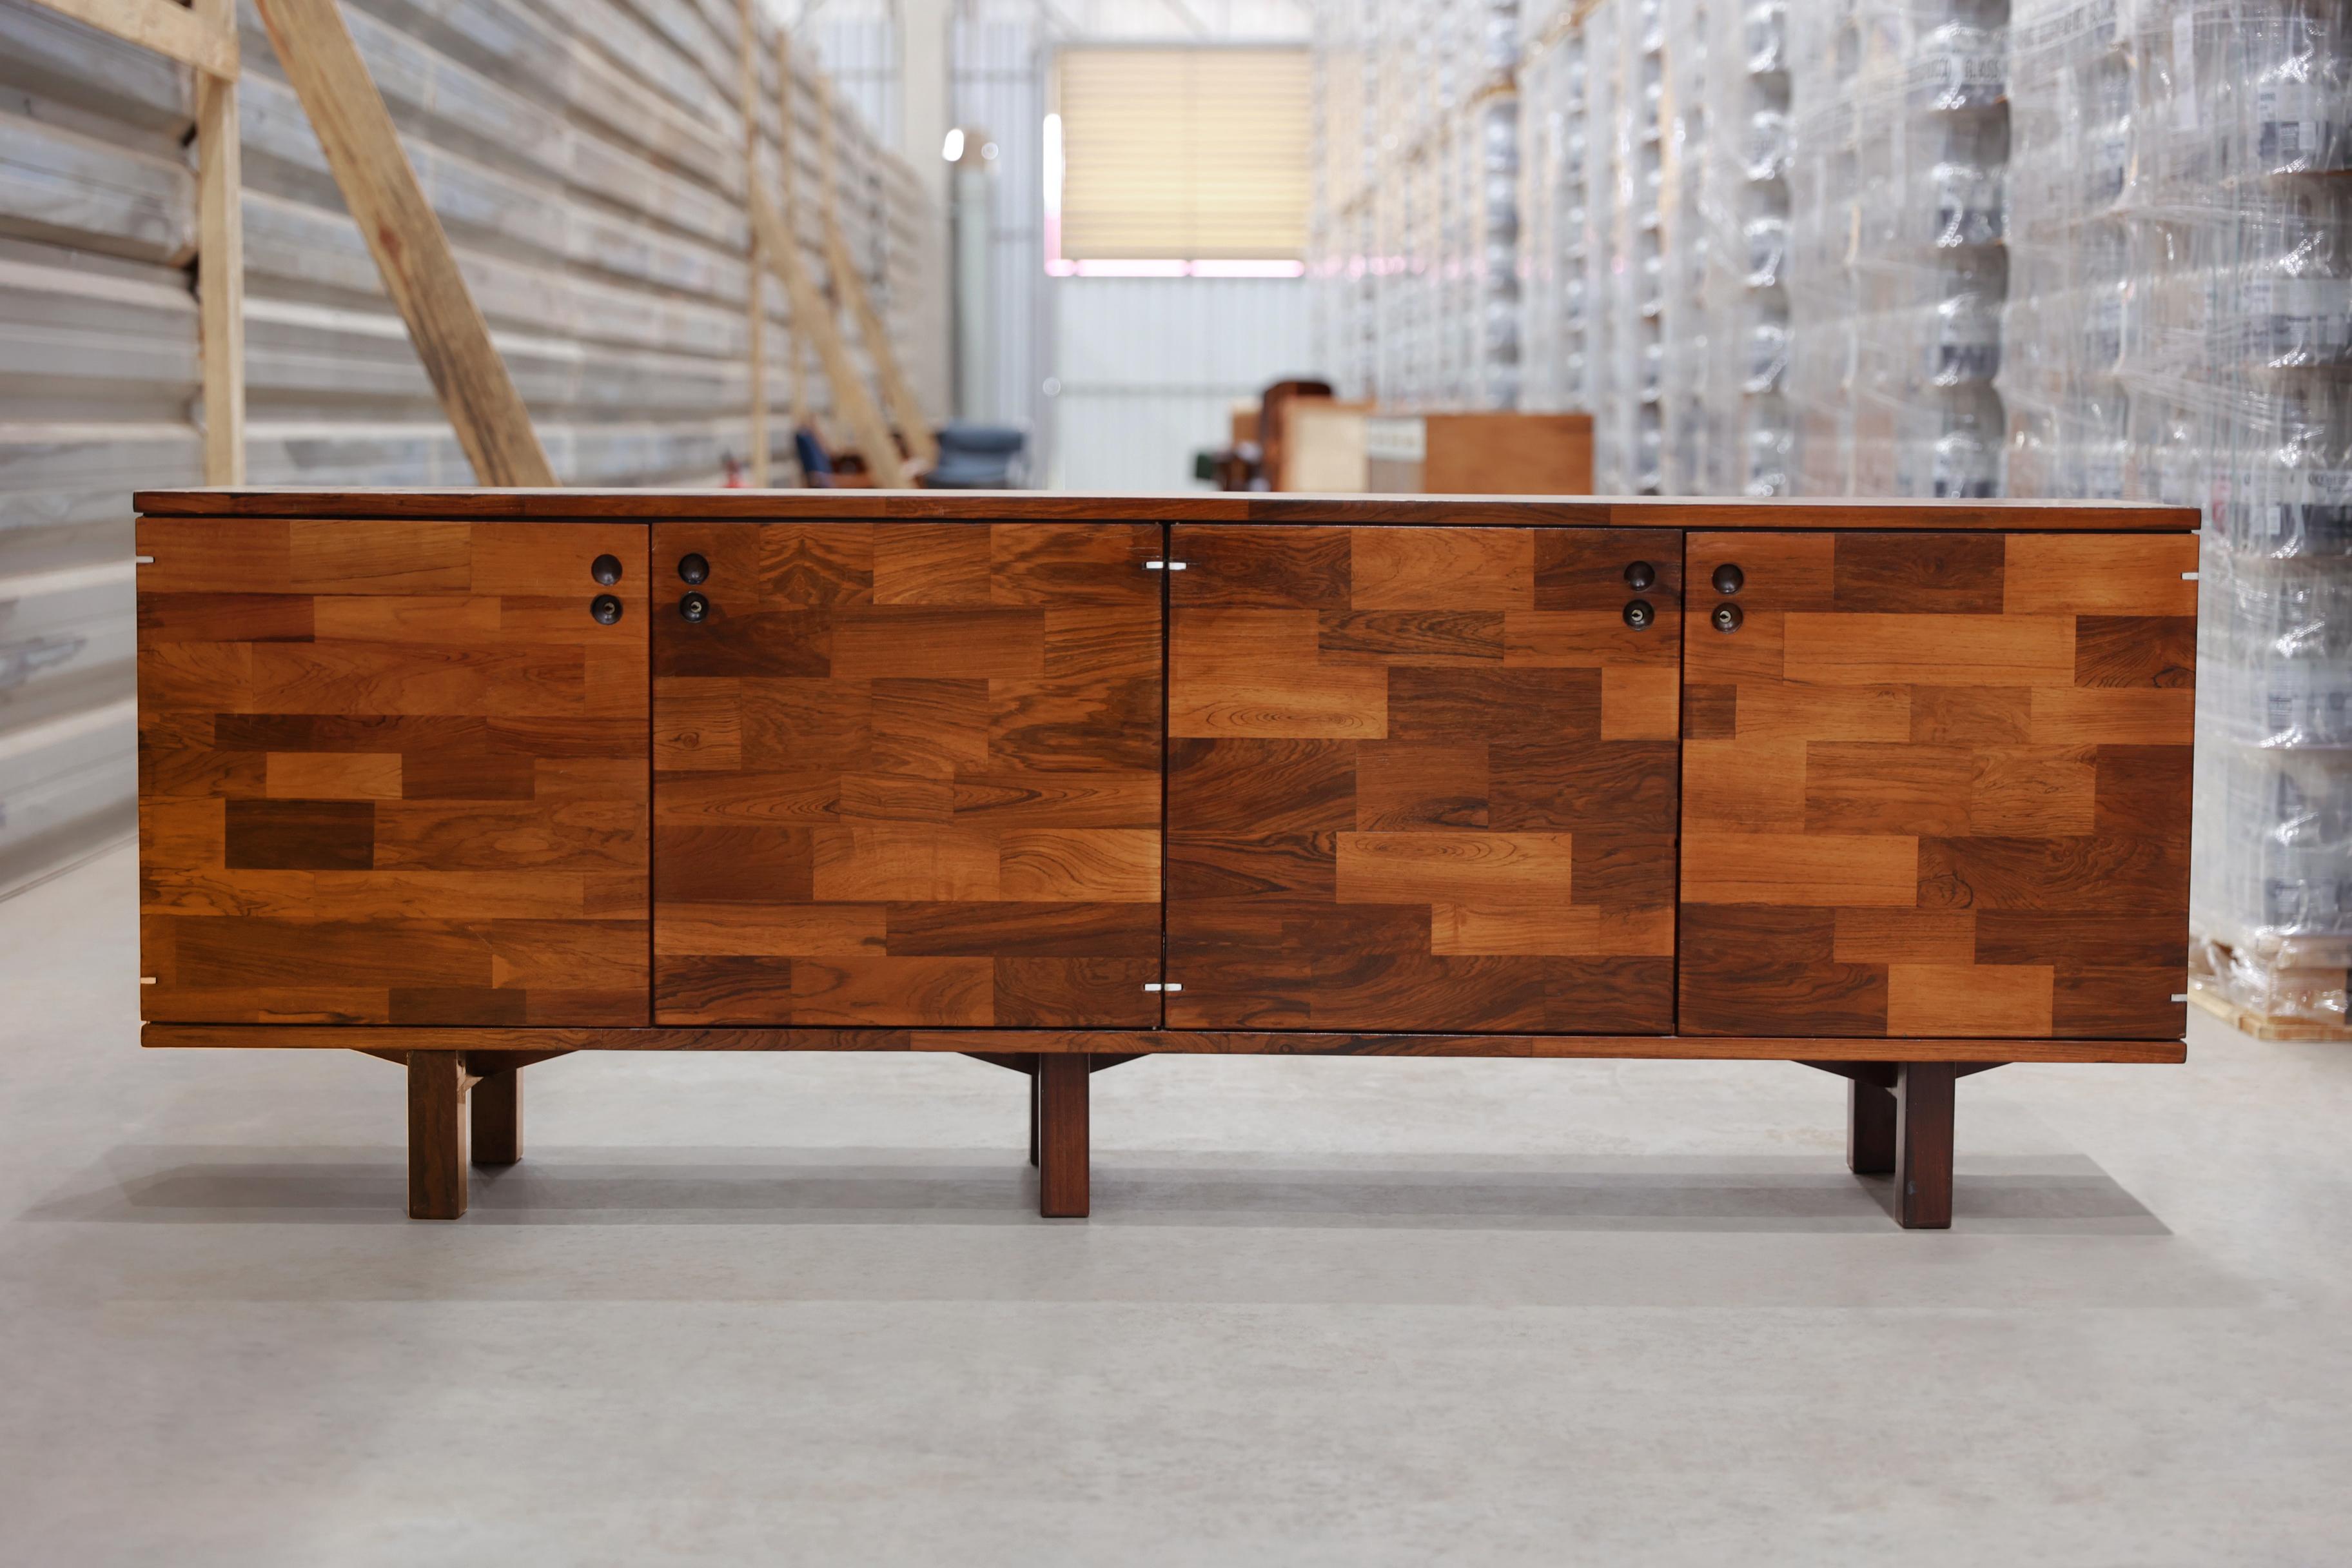 This credenza was designed by Jorge Zalszupin and manufactured by L’Atelier in the 1960s. This piece is part of a whole series of products with modular elements. The buyers could choose how to assemble their own furniture piece by selecting the